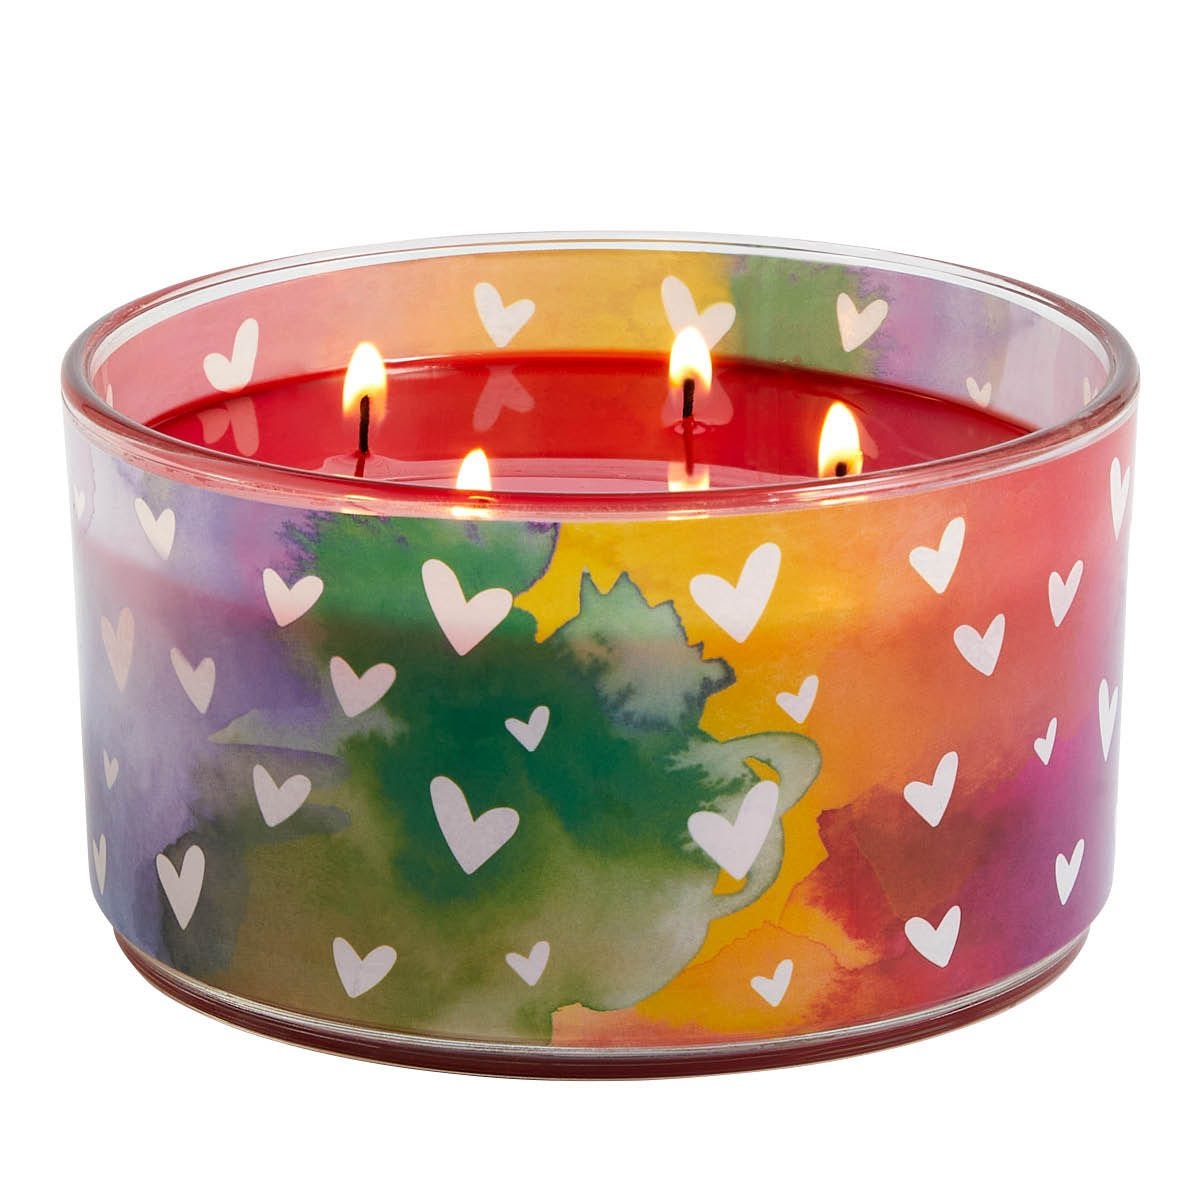 Love is Love Sangria Sunset 4-Wick Specialty Jar Candle - PartyLite US